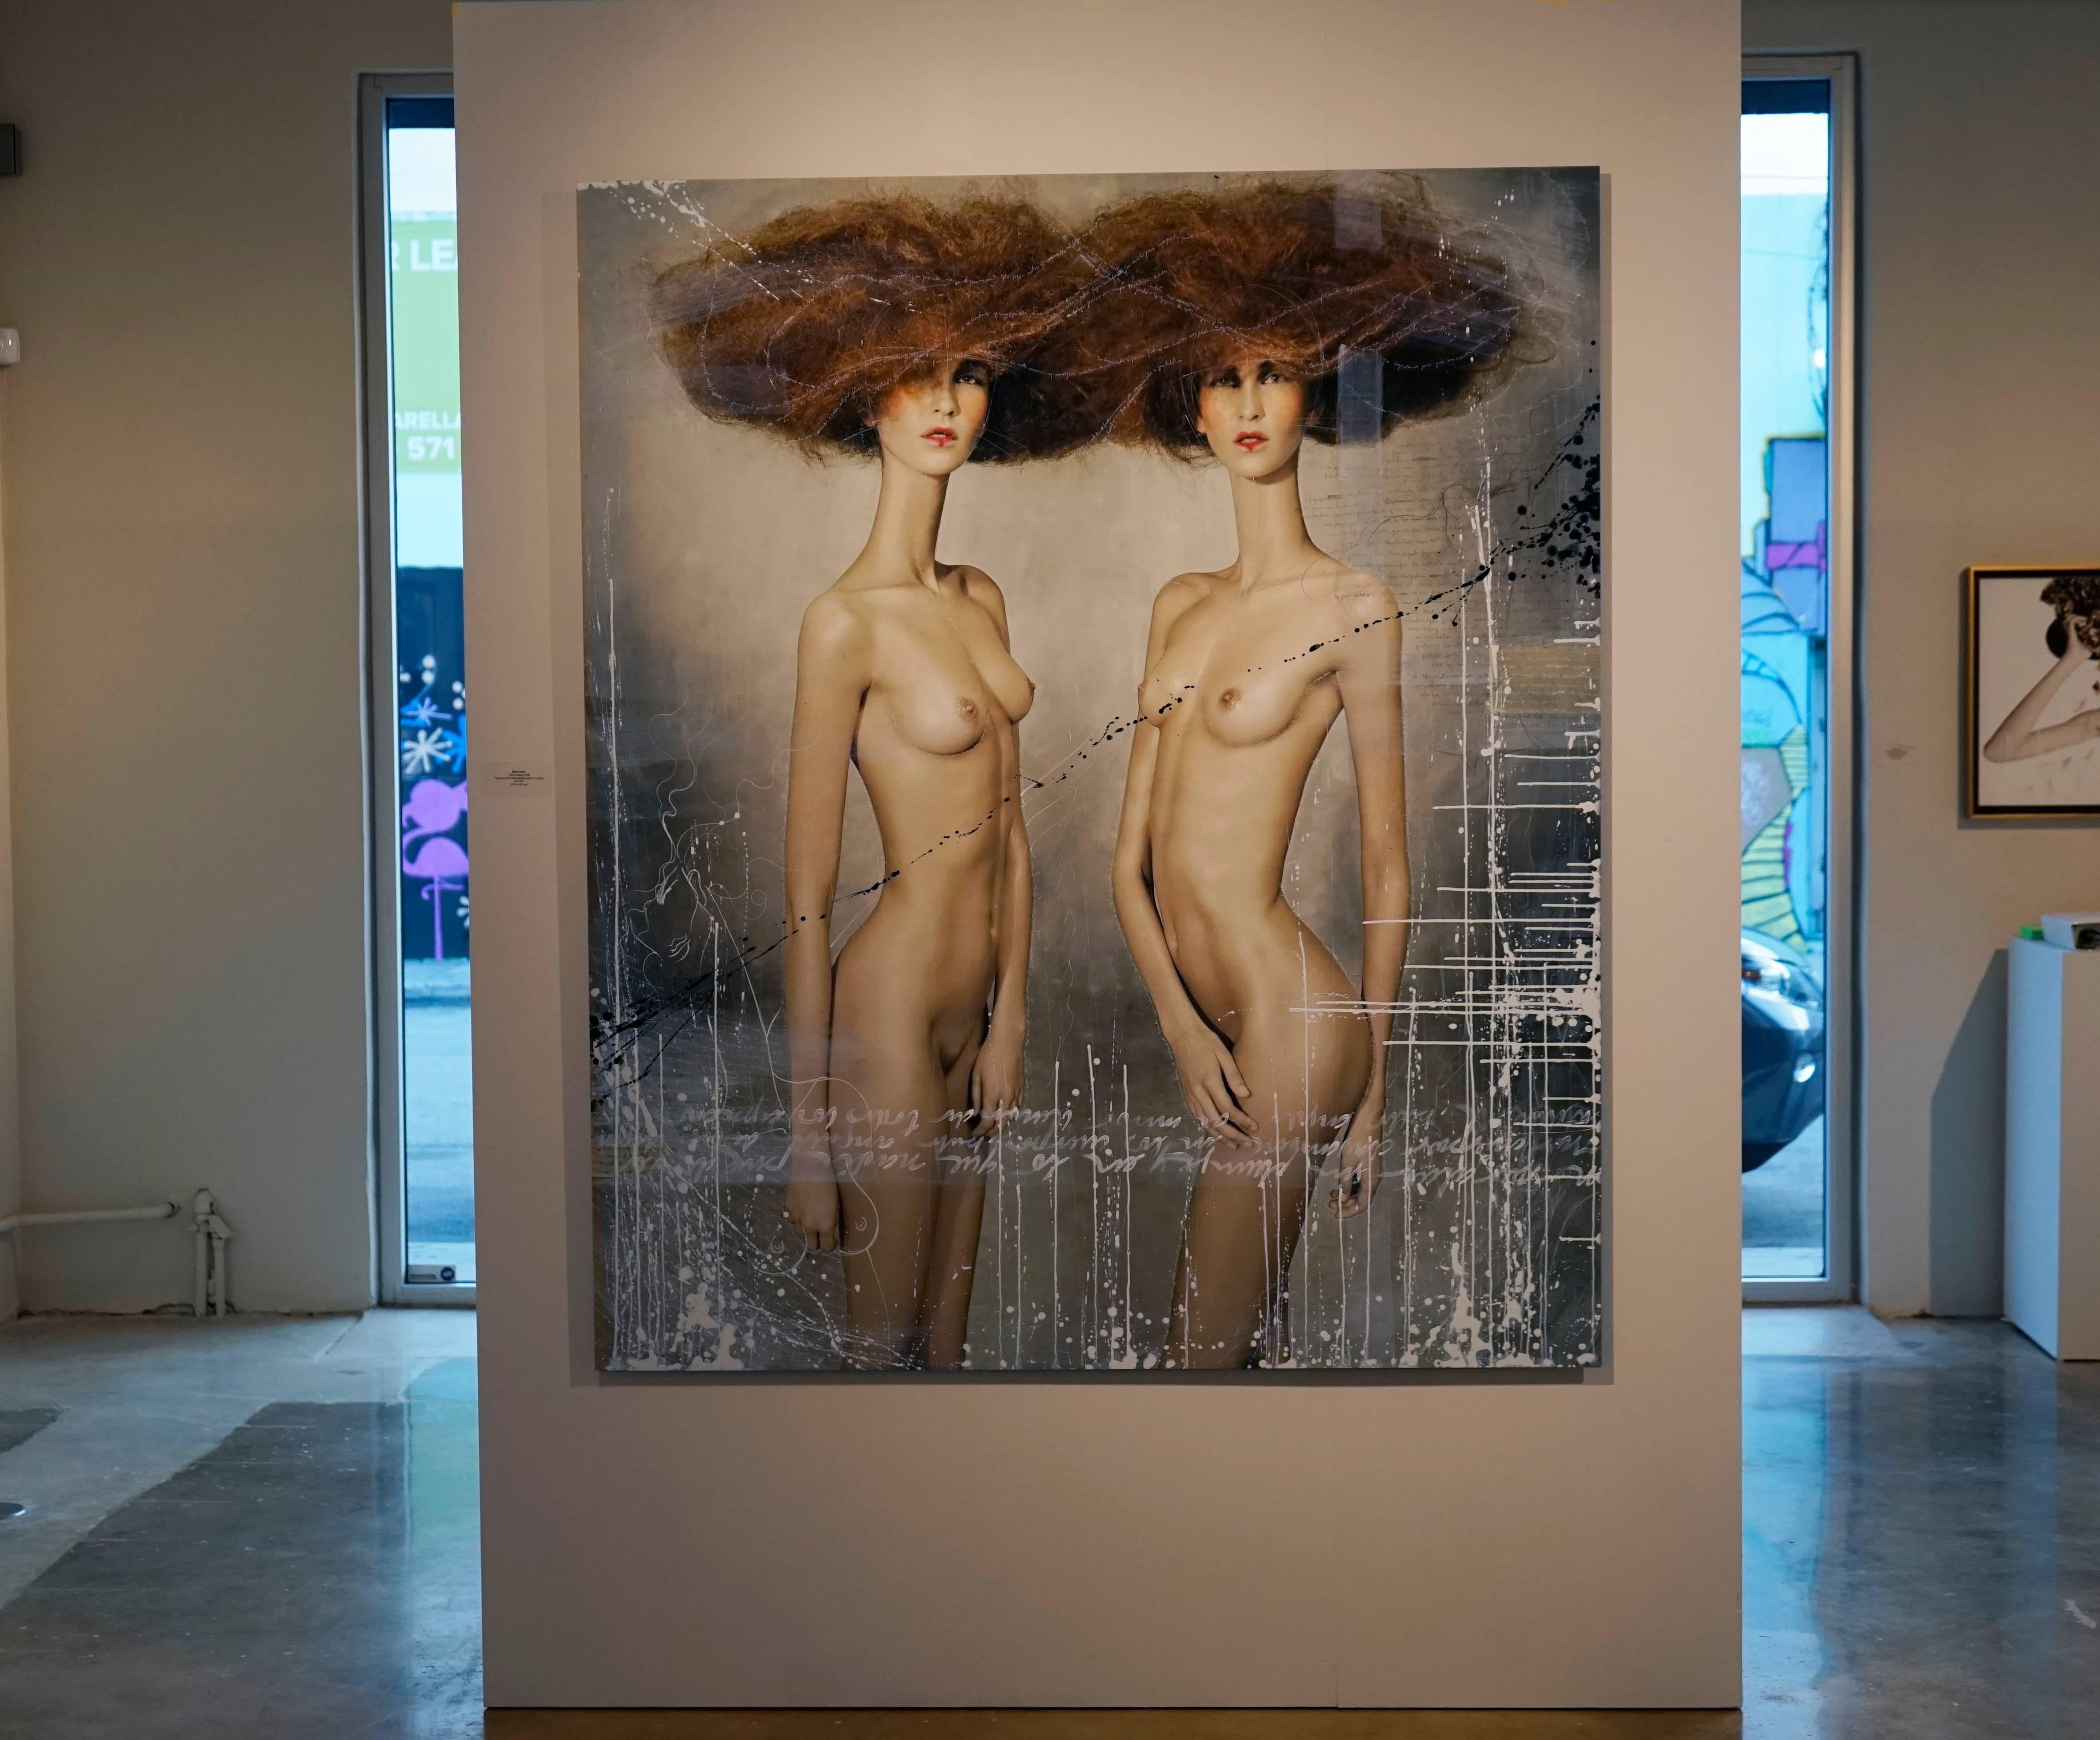 Twins Naked by Efren Isaza
67 x 57 inches
Archival pigment photograph mounted on aluminum, intervened with paint, ink and intentionally scratched by the artist 
Signed, titled, dated and annotated in pencil on the reverse
Acquired from the